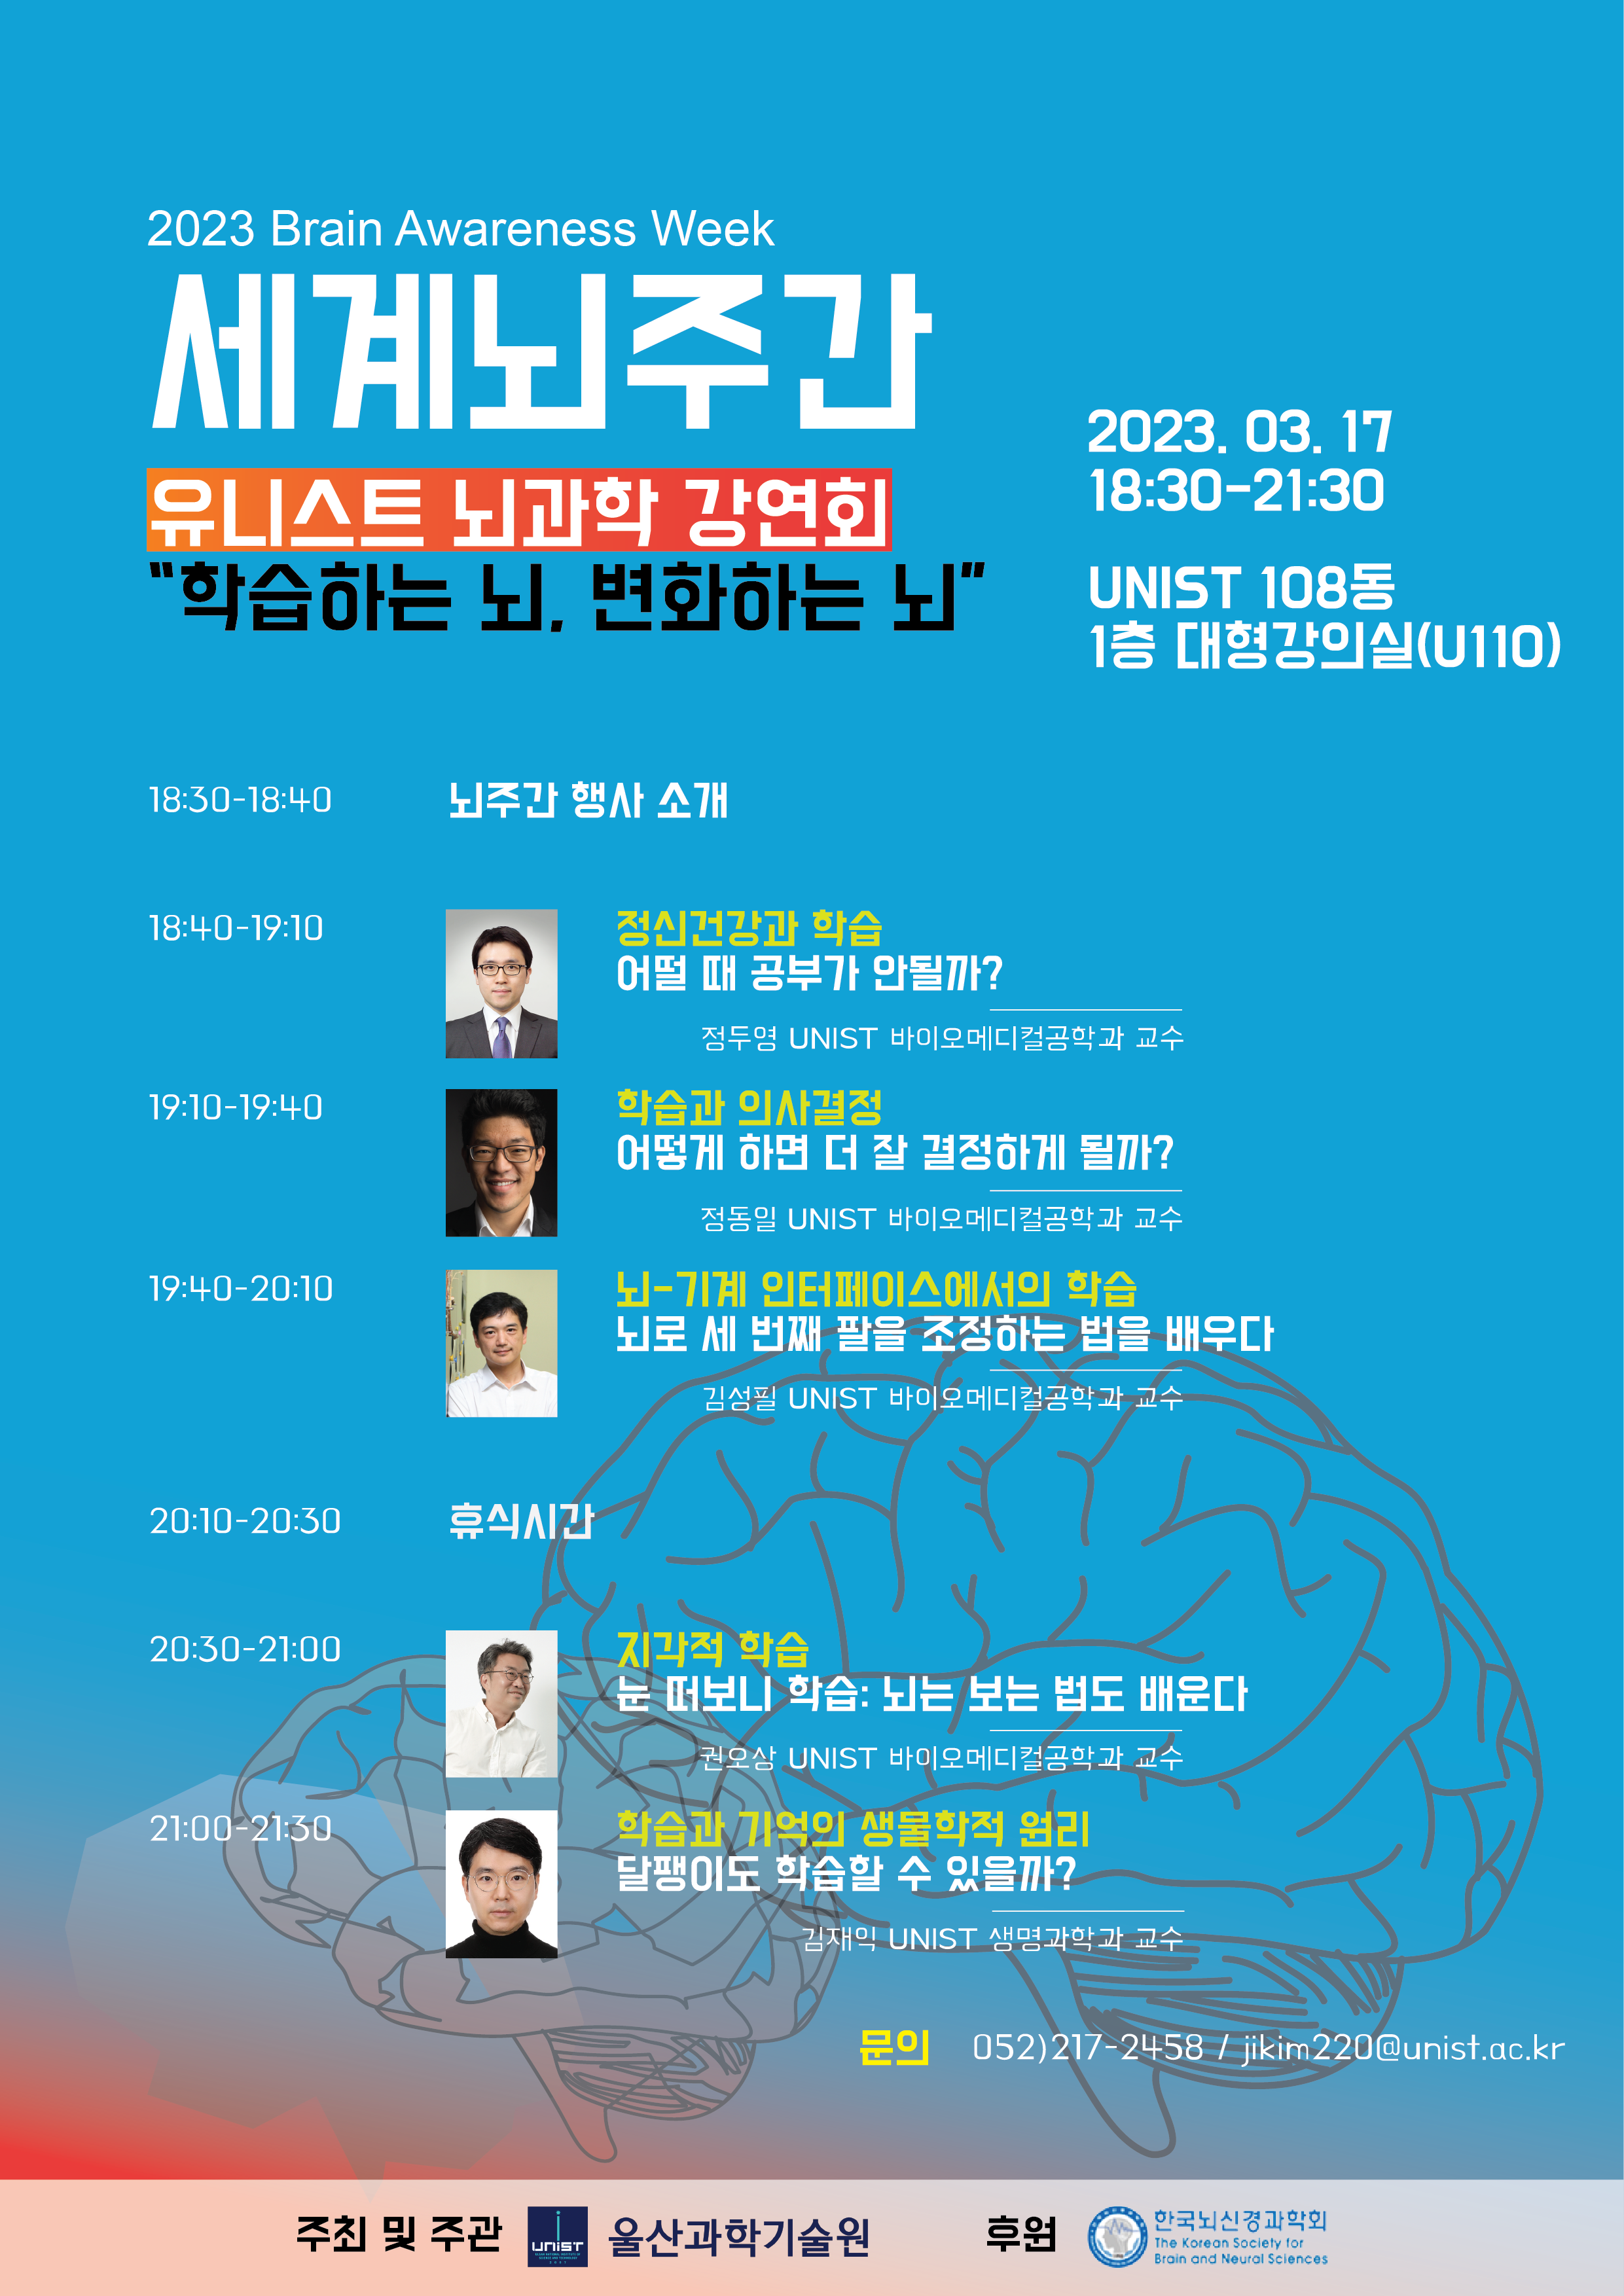 The ''2023 Brain Awareness Week' Public Lecture Series will be held at UNIST on March 17, 2023.